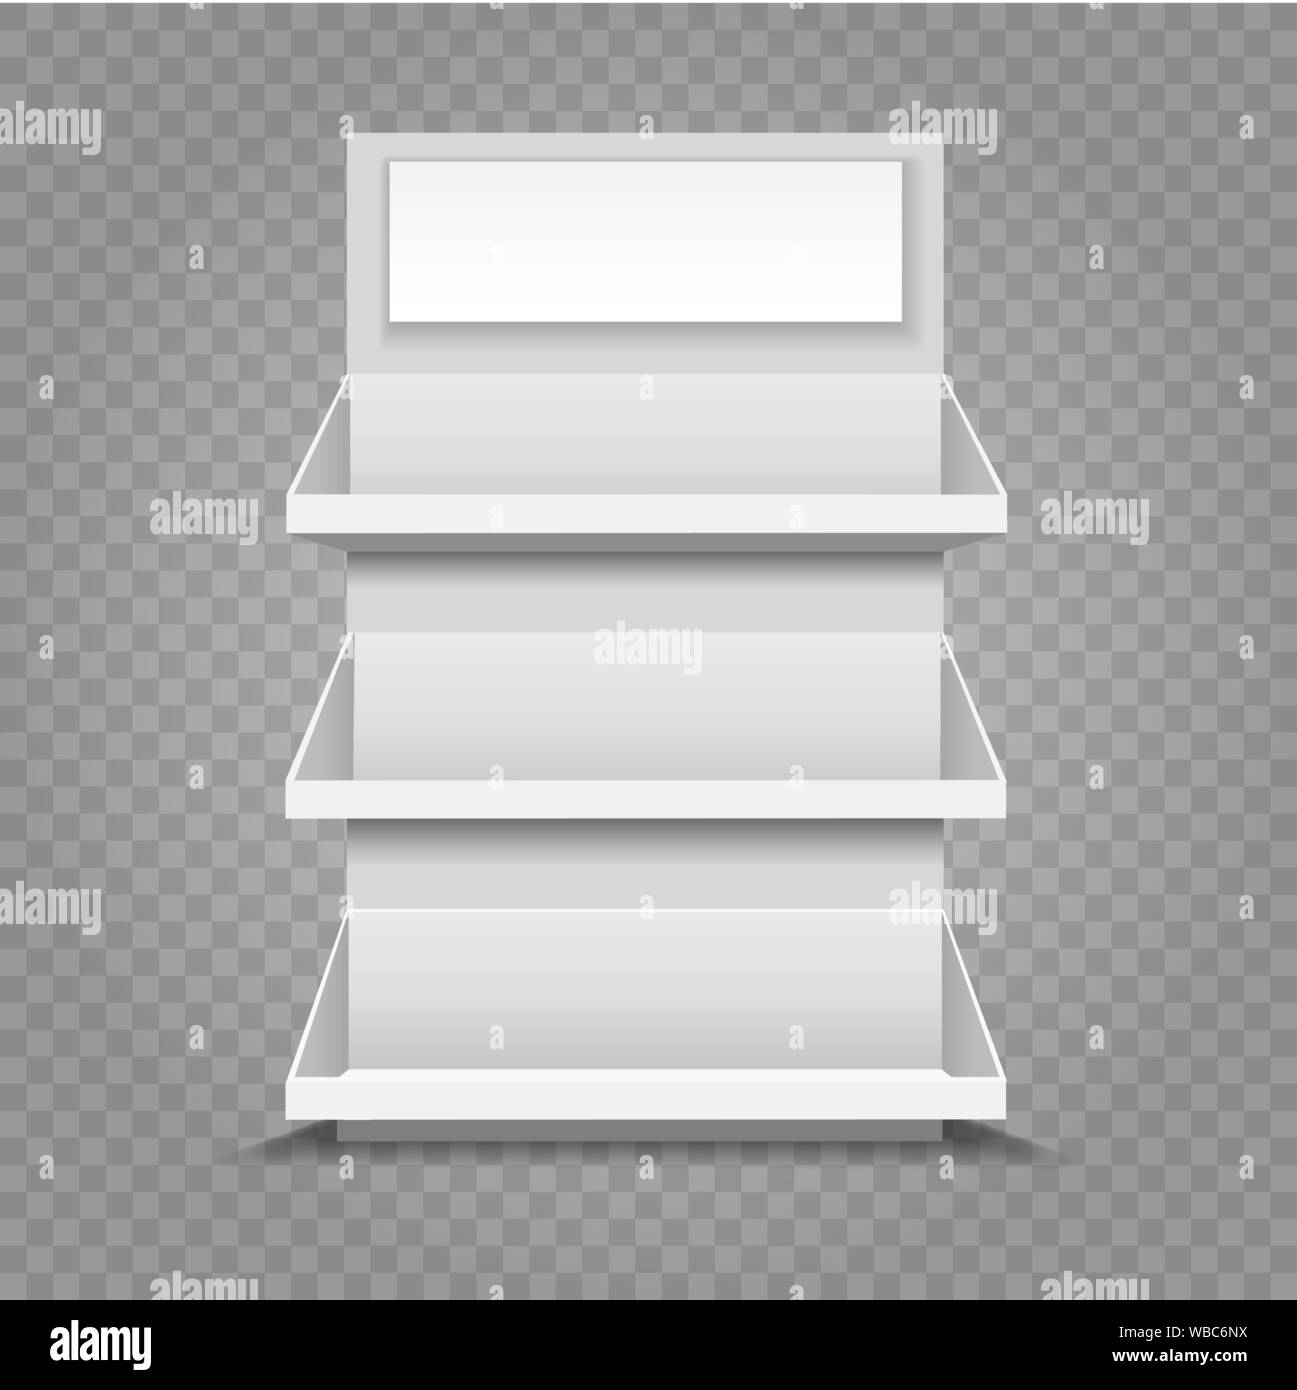 Retail display shelf. Showcase rack, store display vector stand, market retail shelves empty template isolated on transparent background Stock Vector